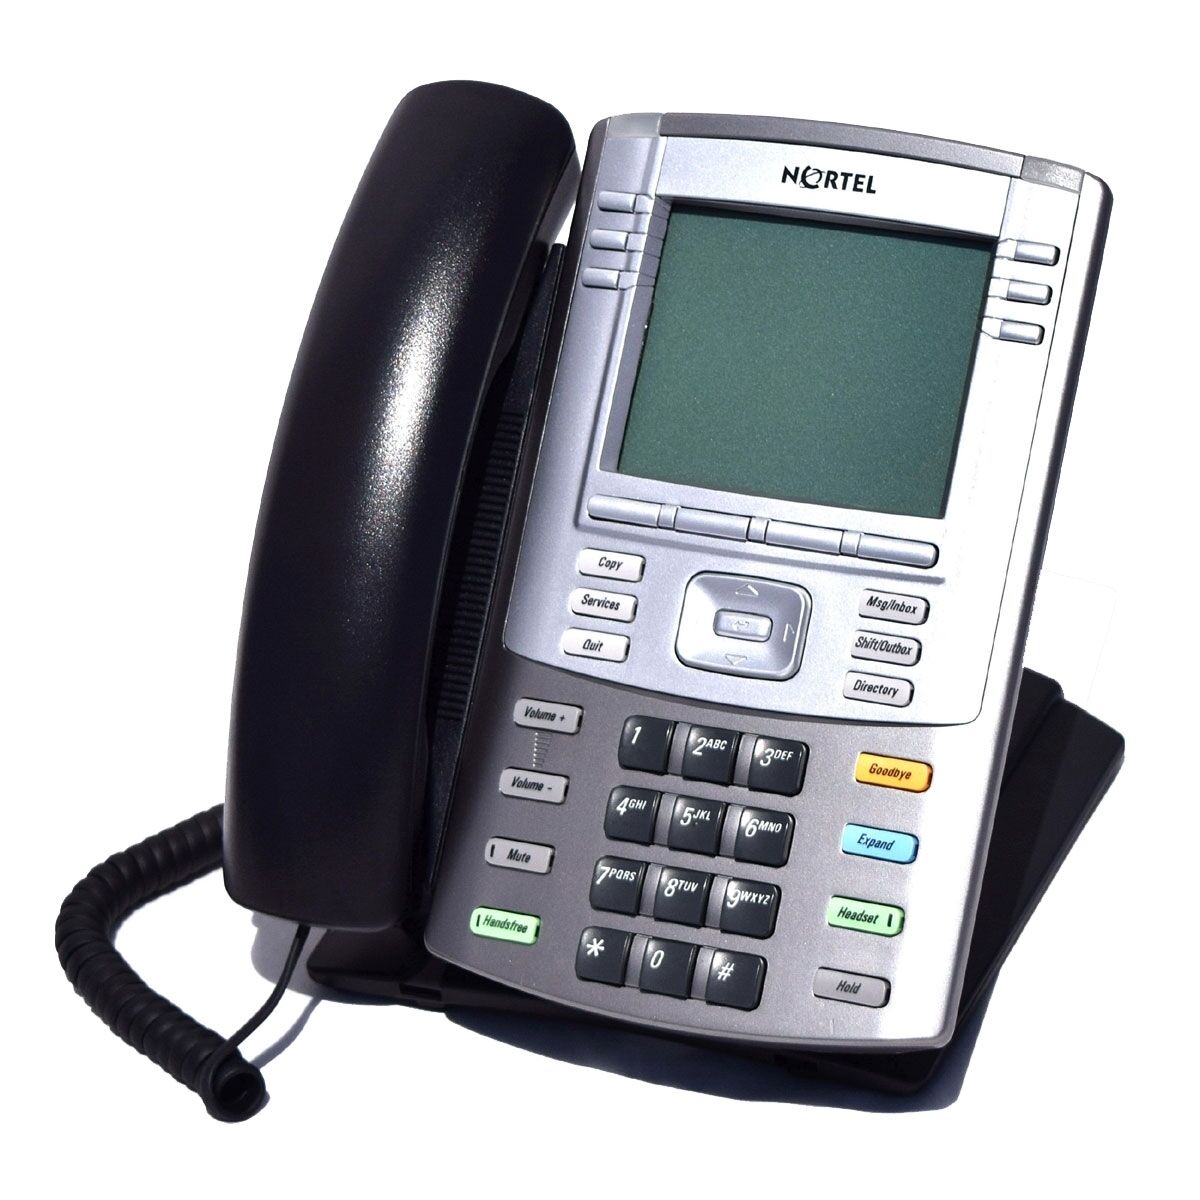  A LOT AVAYA/NORTEL VOIP 1140e PHONES SALE with 2 YEAR WARRANTY 